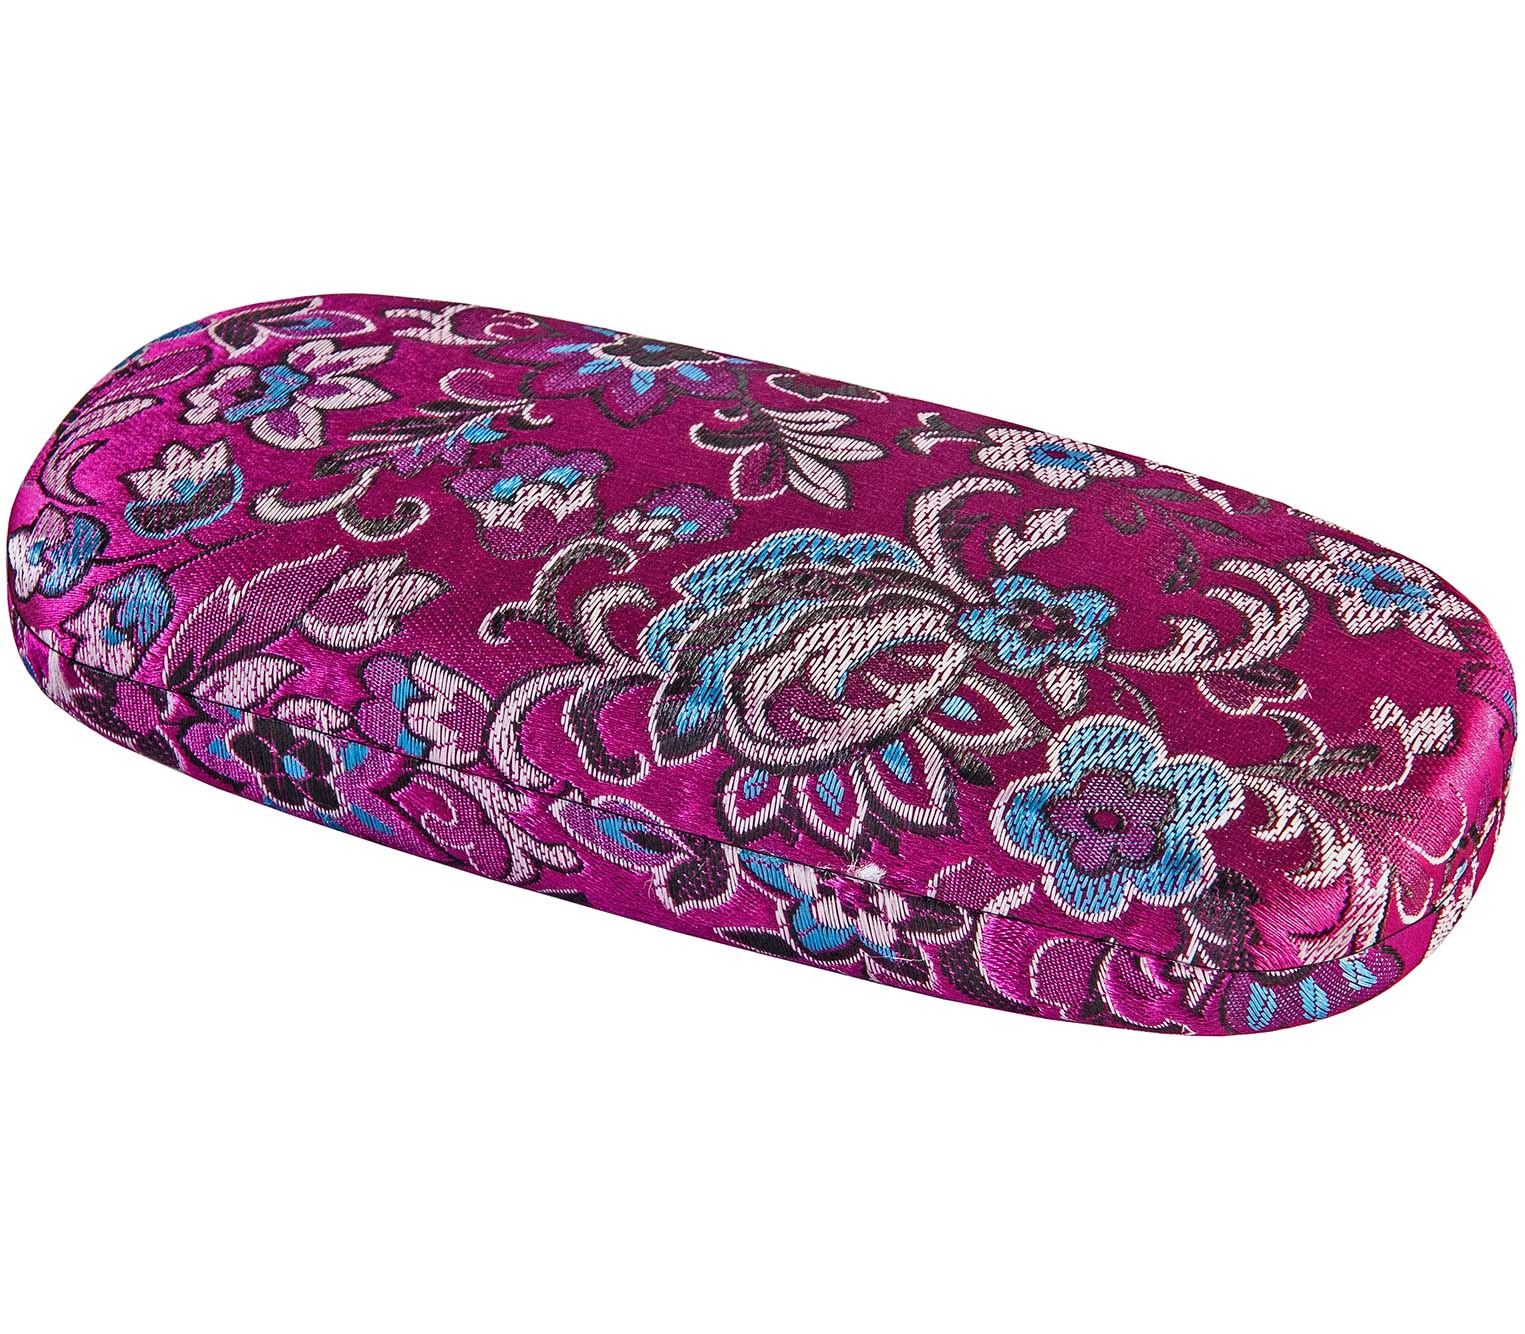 Main Image (Angle) - Diva (Pink) Glasses Cases Accessories